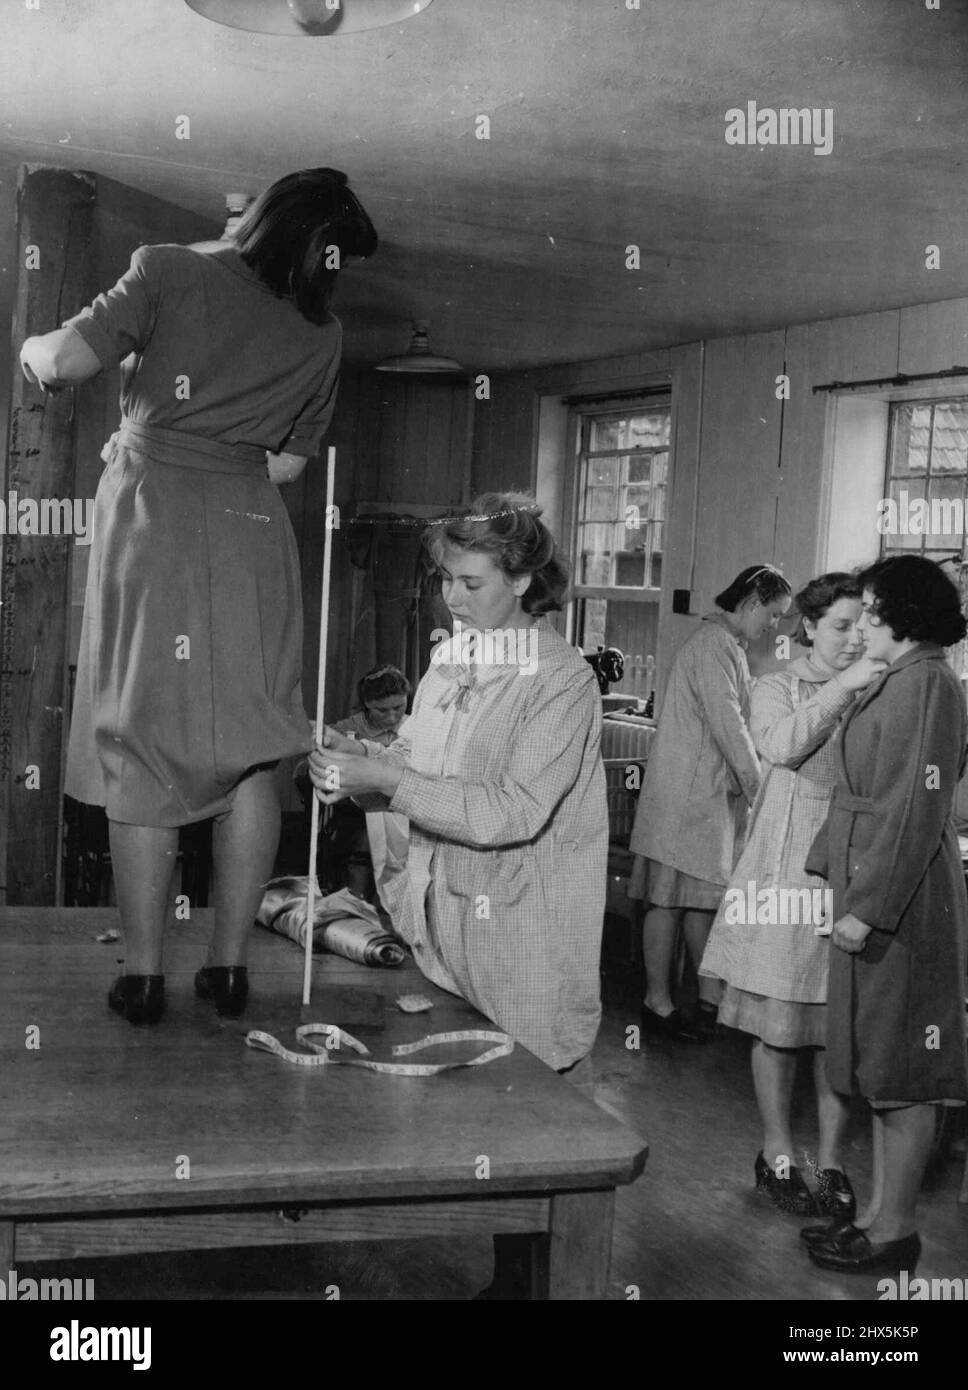 Denham Court Girl's School -- Dressmaking Class. Home Office Schools or Approved Schools are intended for the education and training of boys and girls between the ages of 10 and 17 sent to them by the Courts either was young offenders or as needing care and protection. The schools are approved and inspected by the Home Office and costs are borne in equal proportions by the Exchequer and the local authorities out of local rates. In 1945 there were about 150 Approved Schools. These photographs were taken at Denham Court, a Senior Girls' School run by the Middlesex Education Authority. The girls Stock Photo